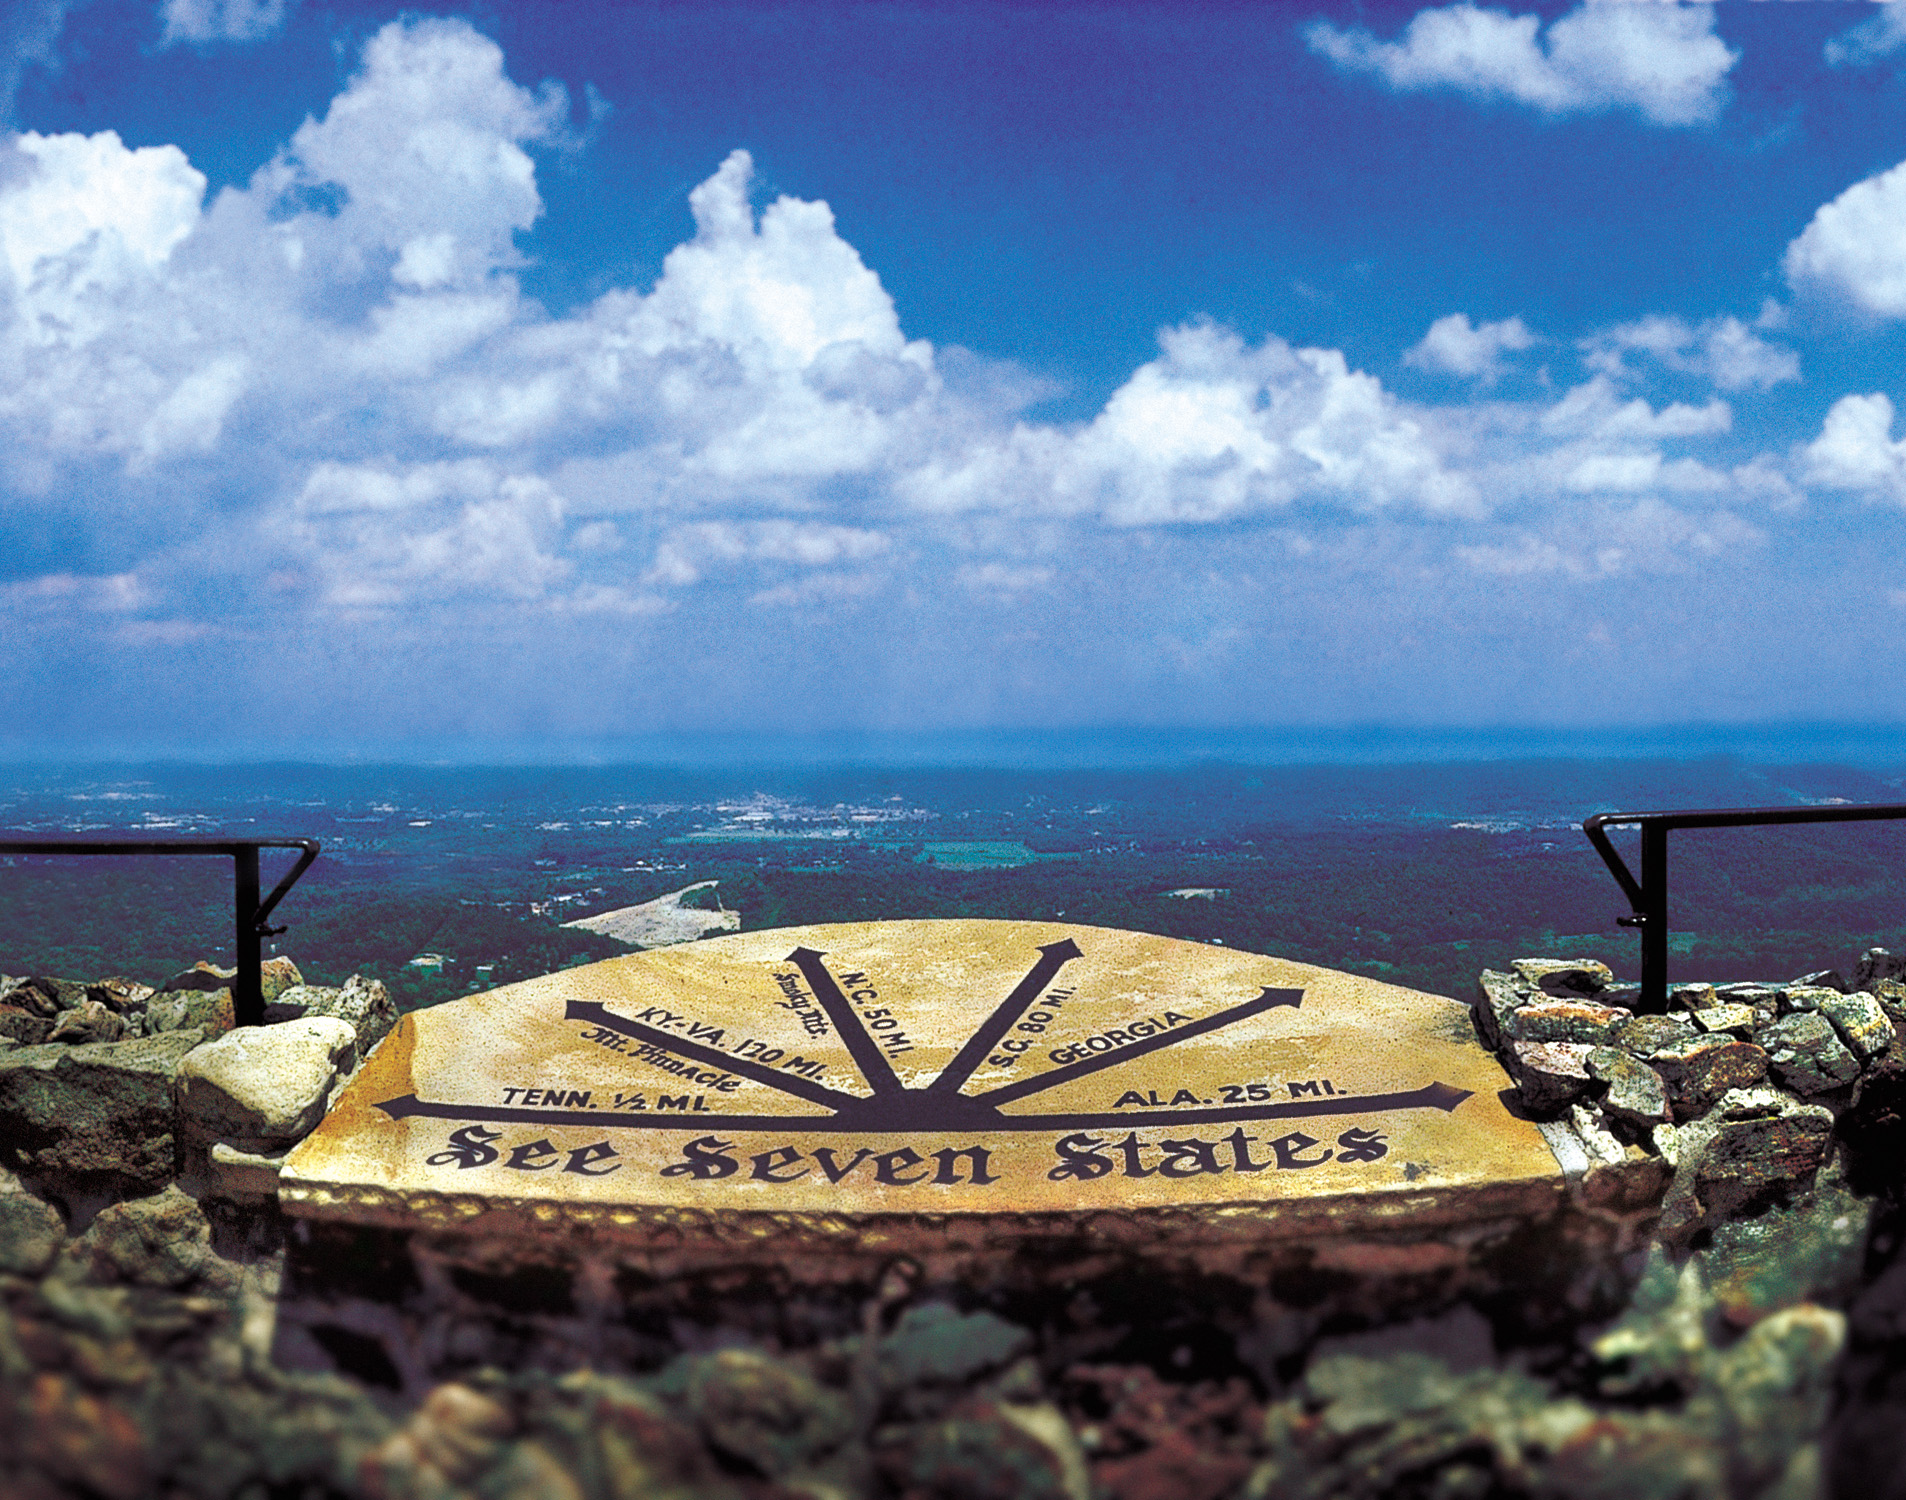 See Seven States at Rock City on Lookout Mountain in Chattanooga, Tennessee tour